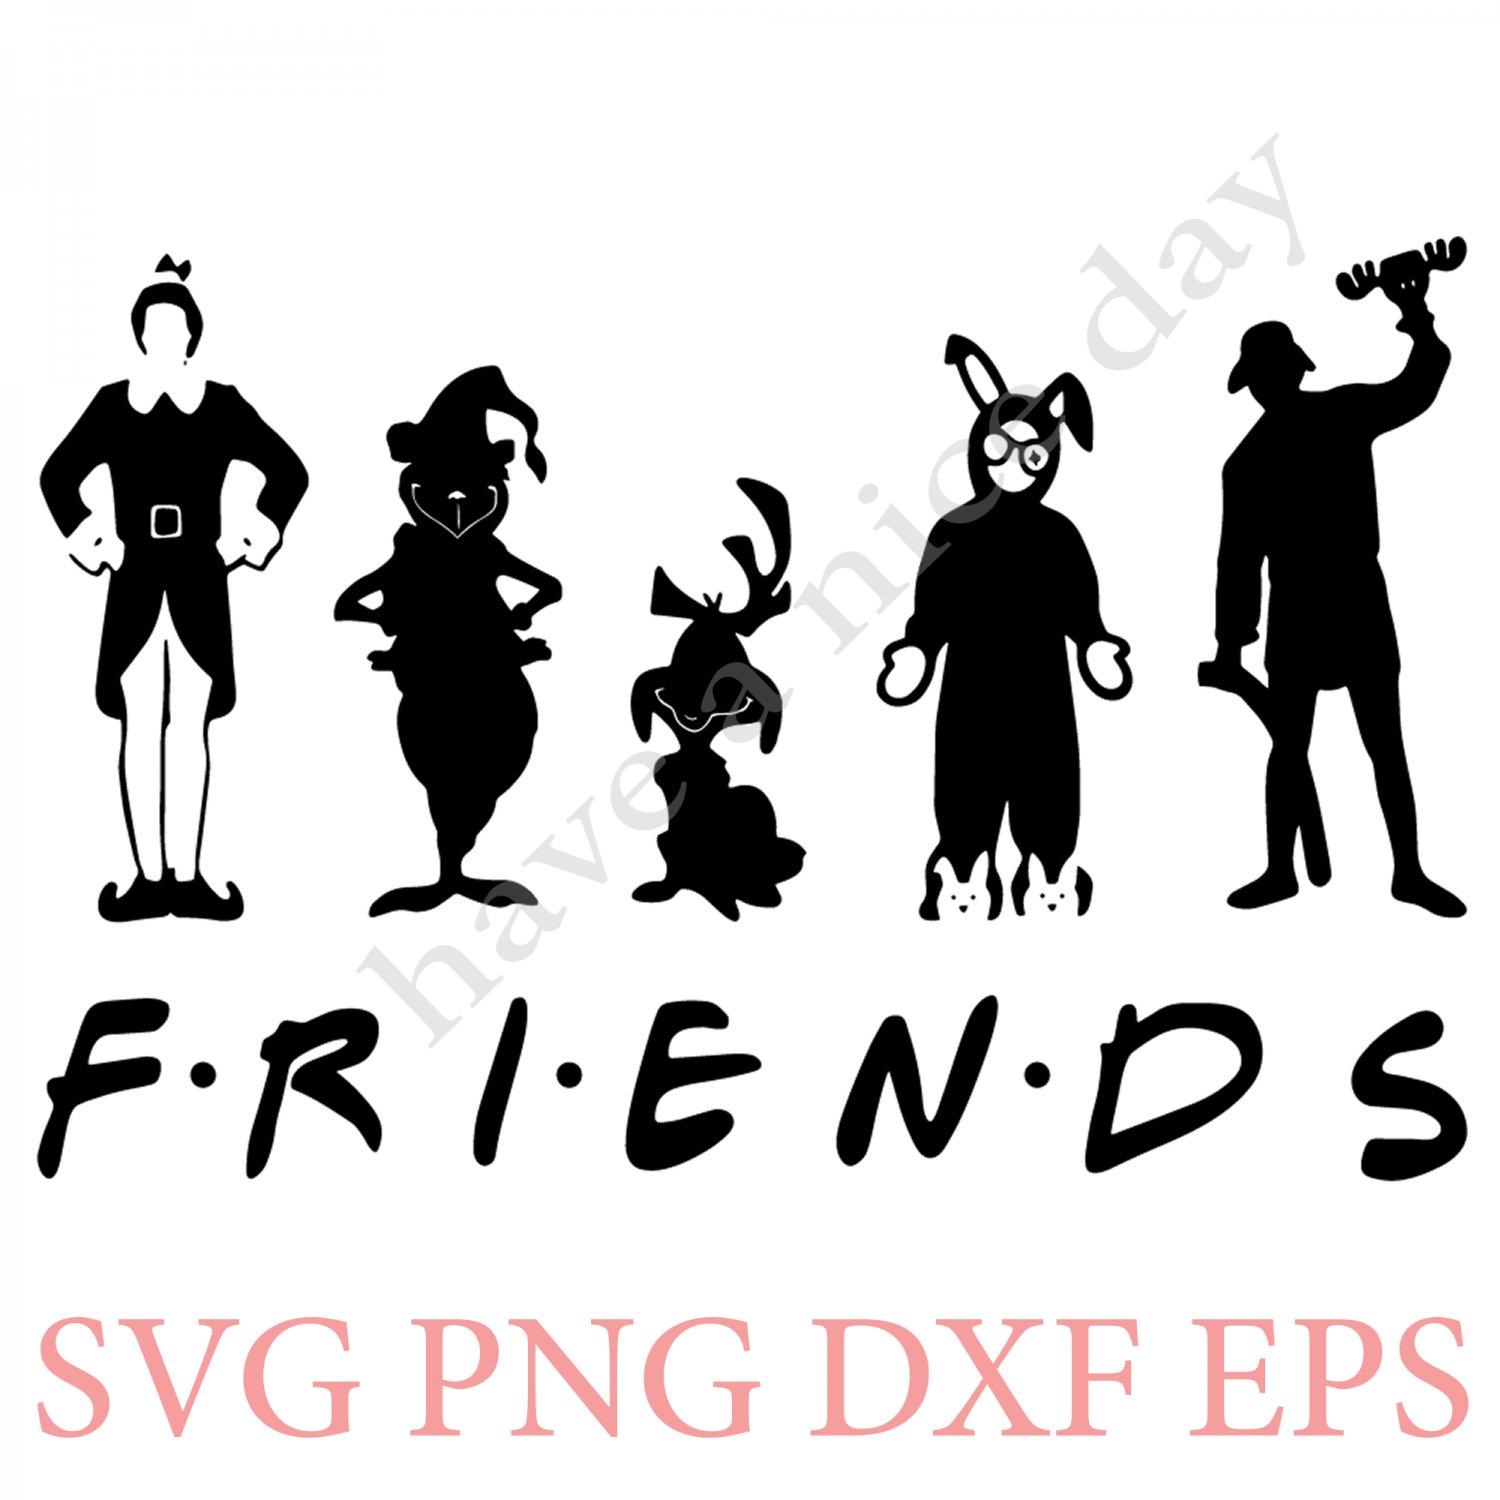 Download Christmas movie Svg Png Dxf Eps Vector Files , silhouette ...